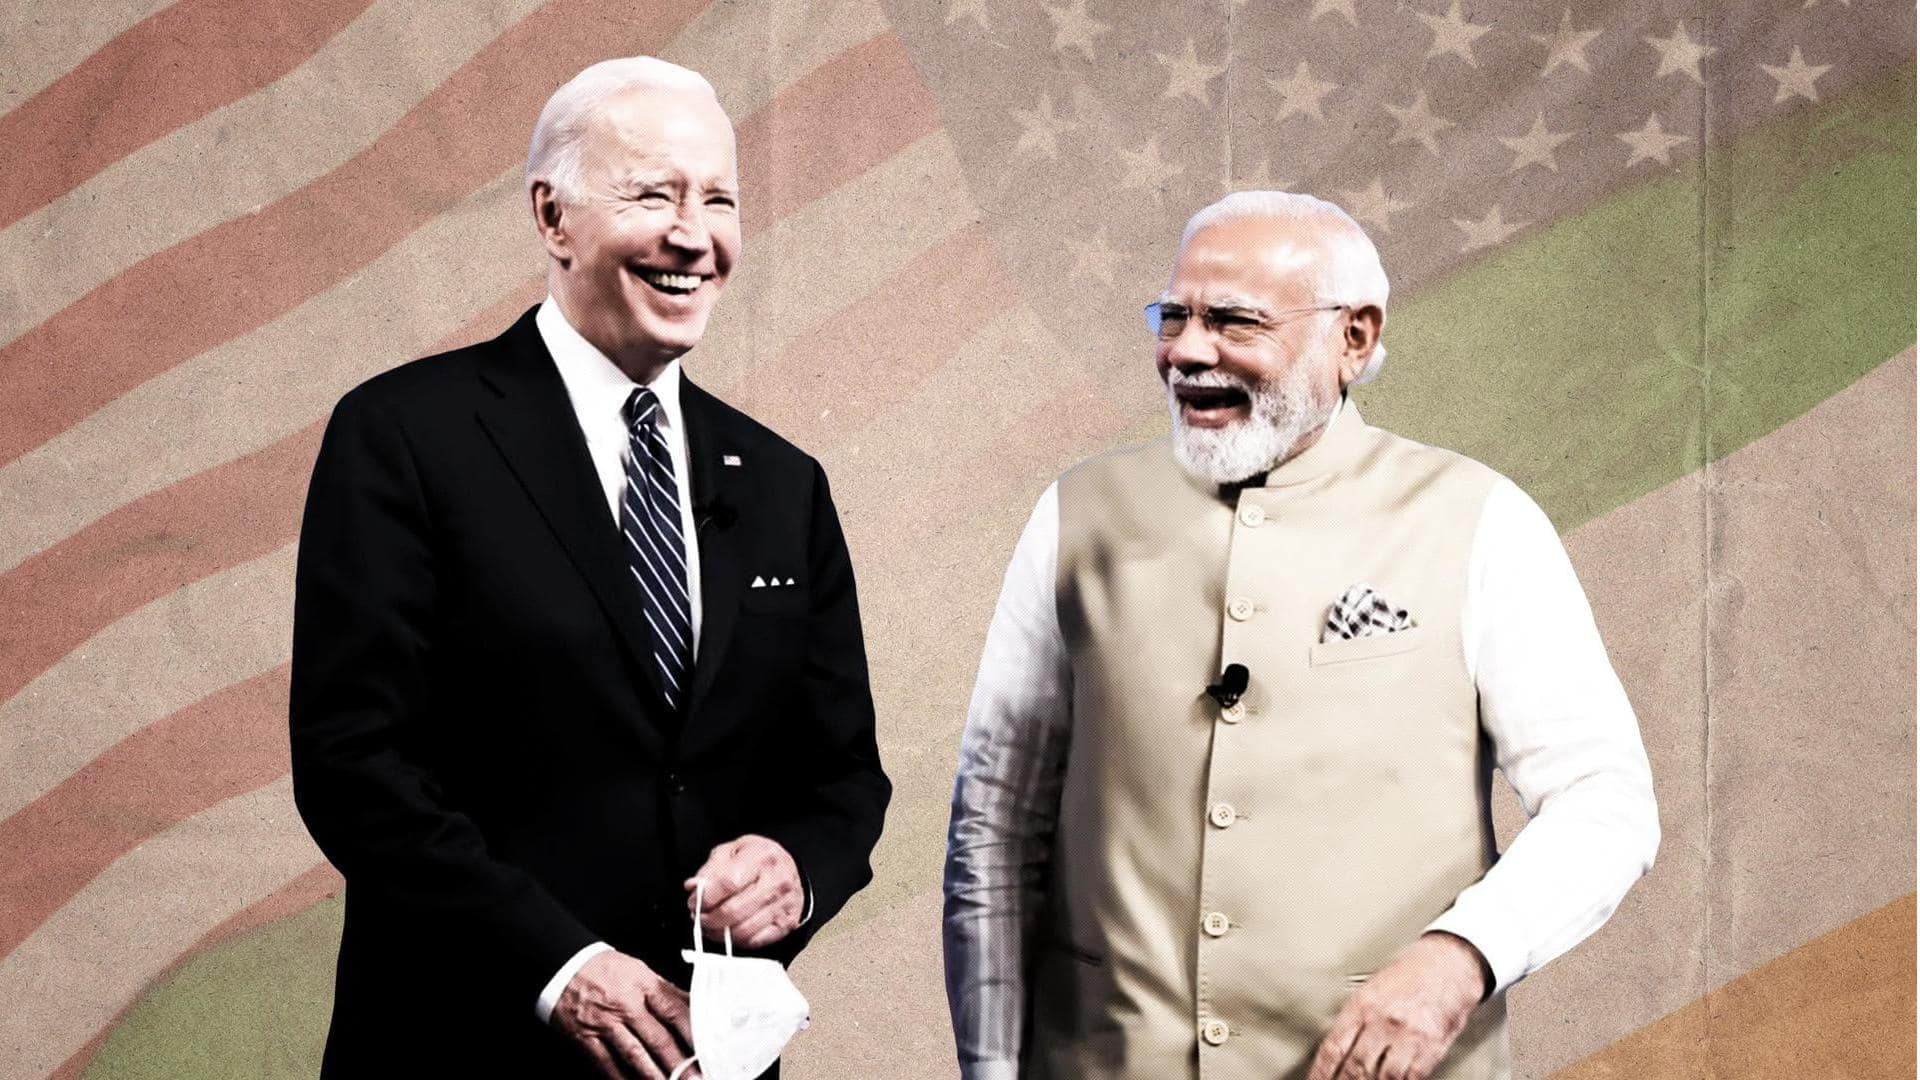 Know about PM Modi's packed schedule during US visit